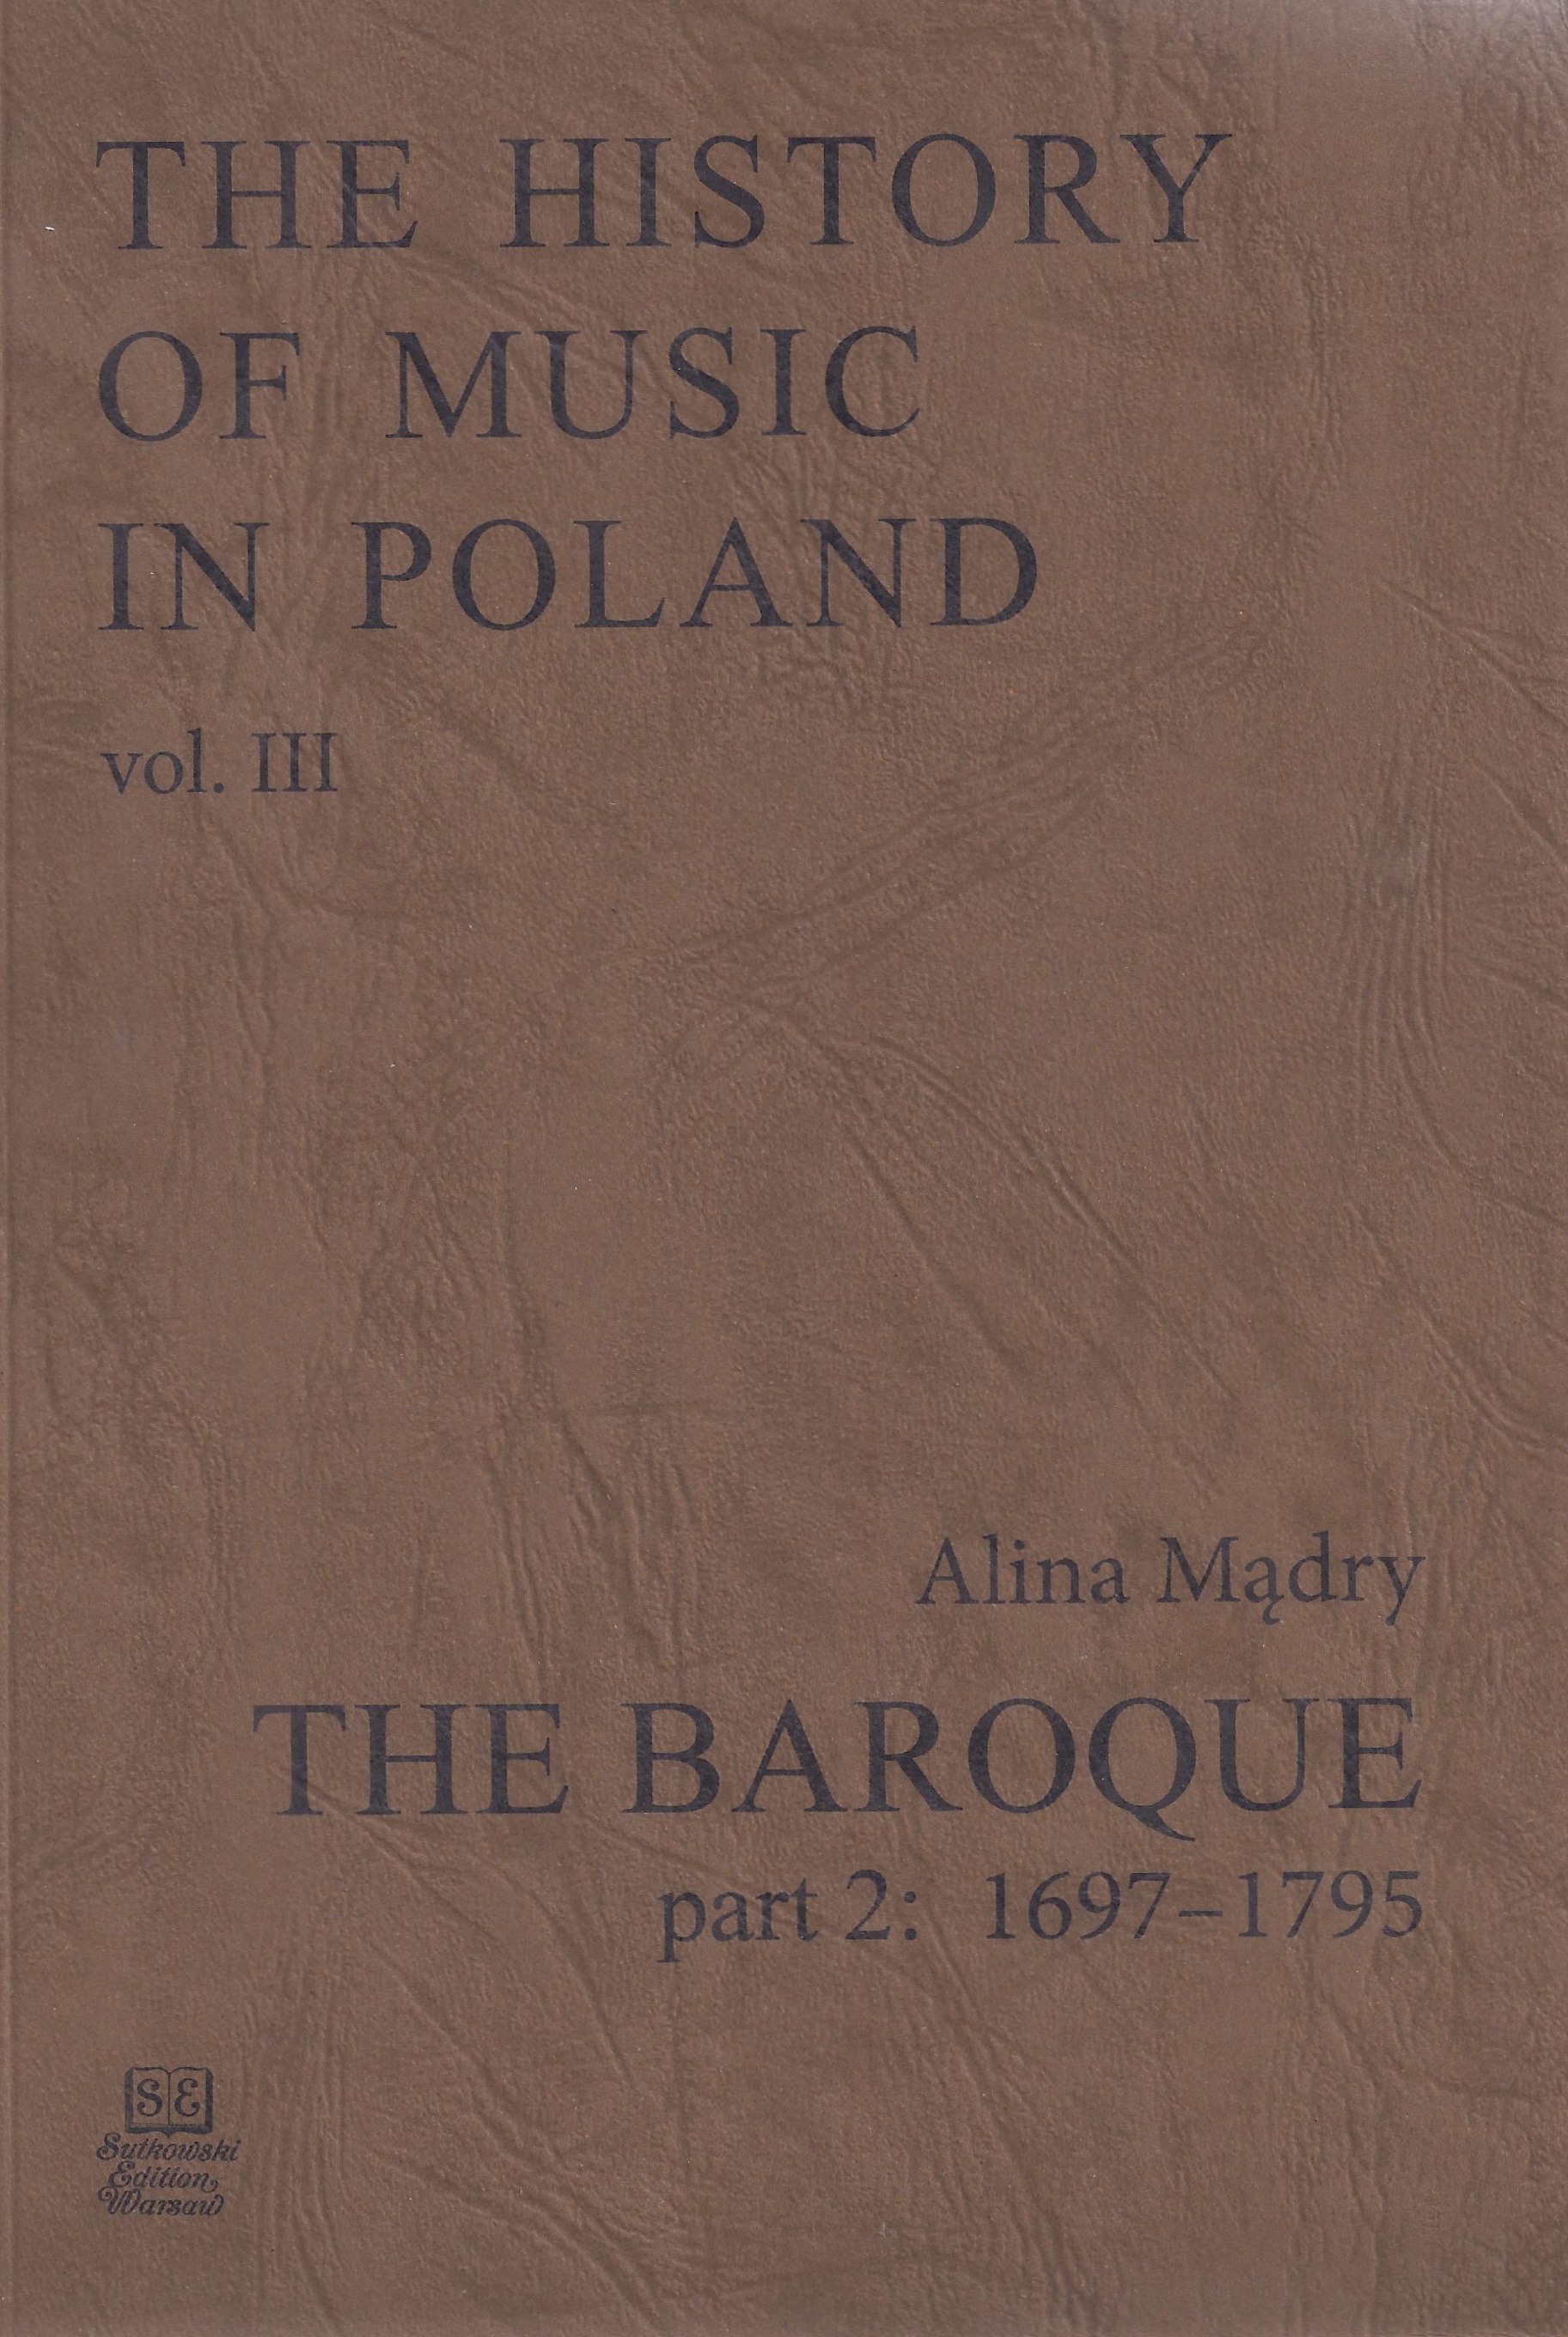 The History of Music in Poland vol III Part 2 – The Baroque (1697-1795)